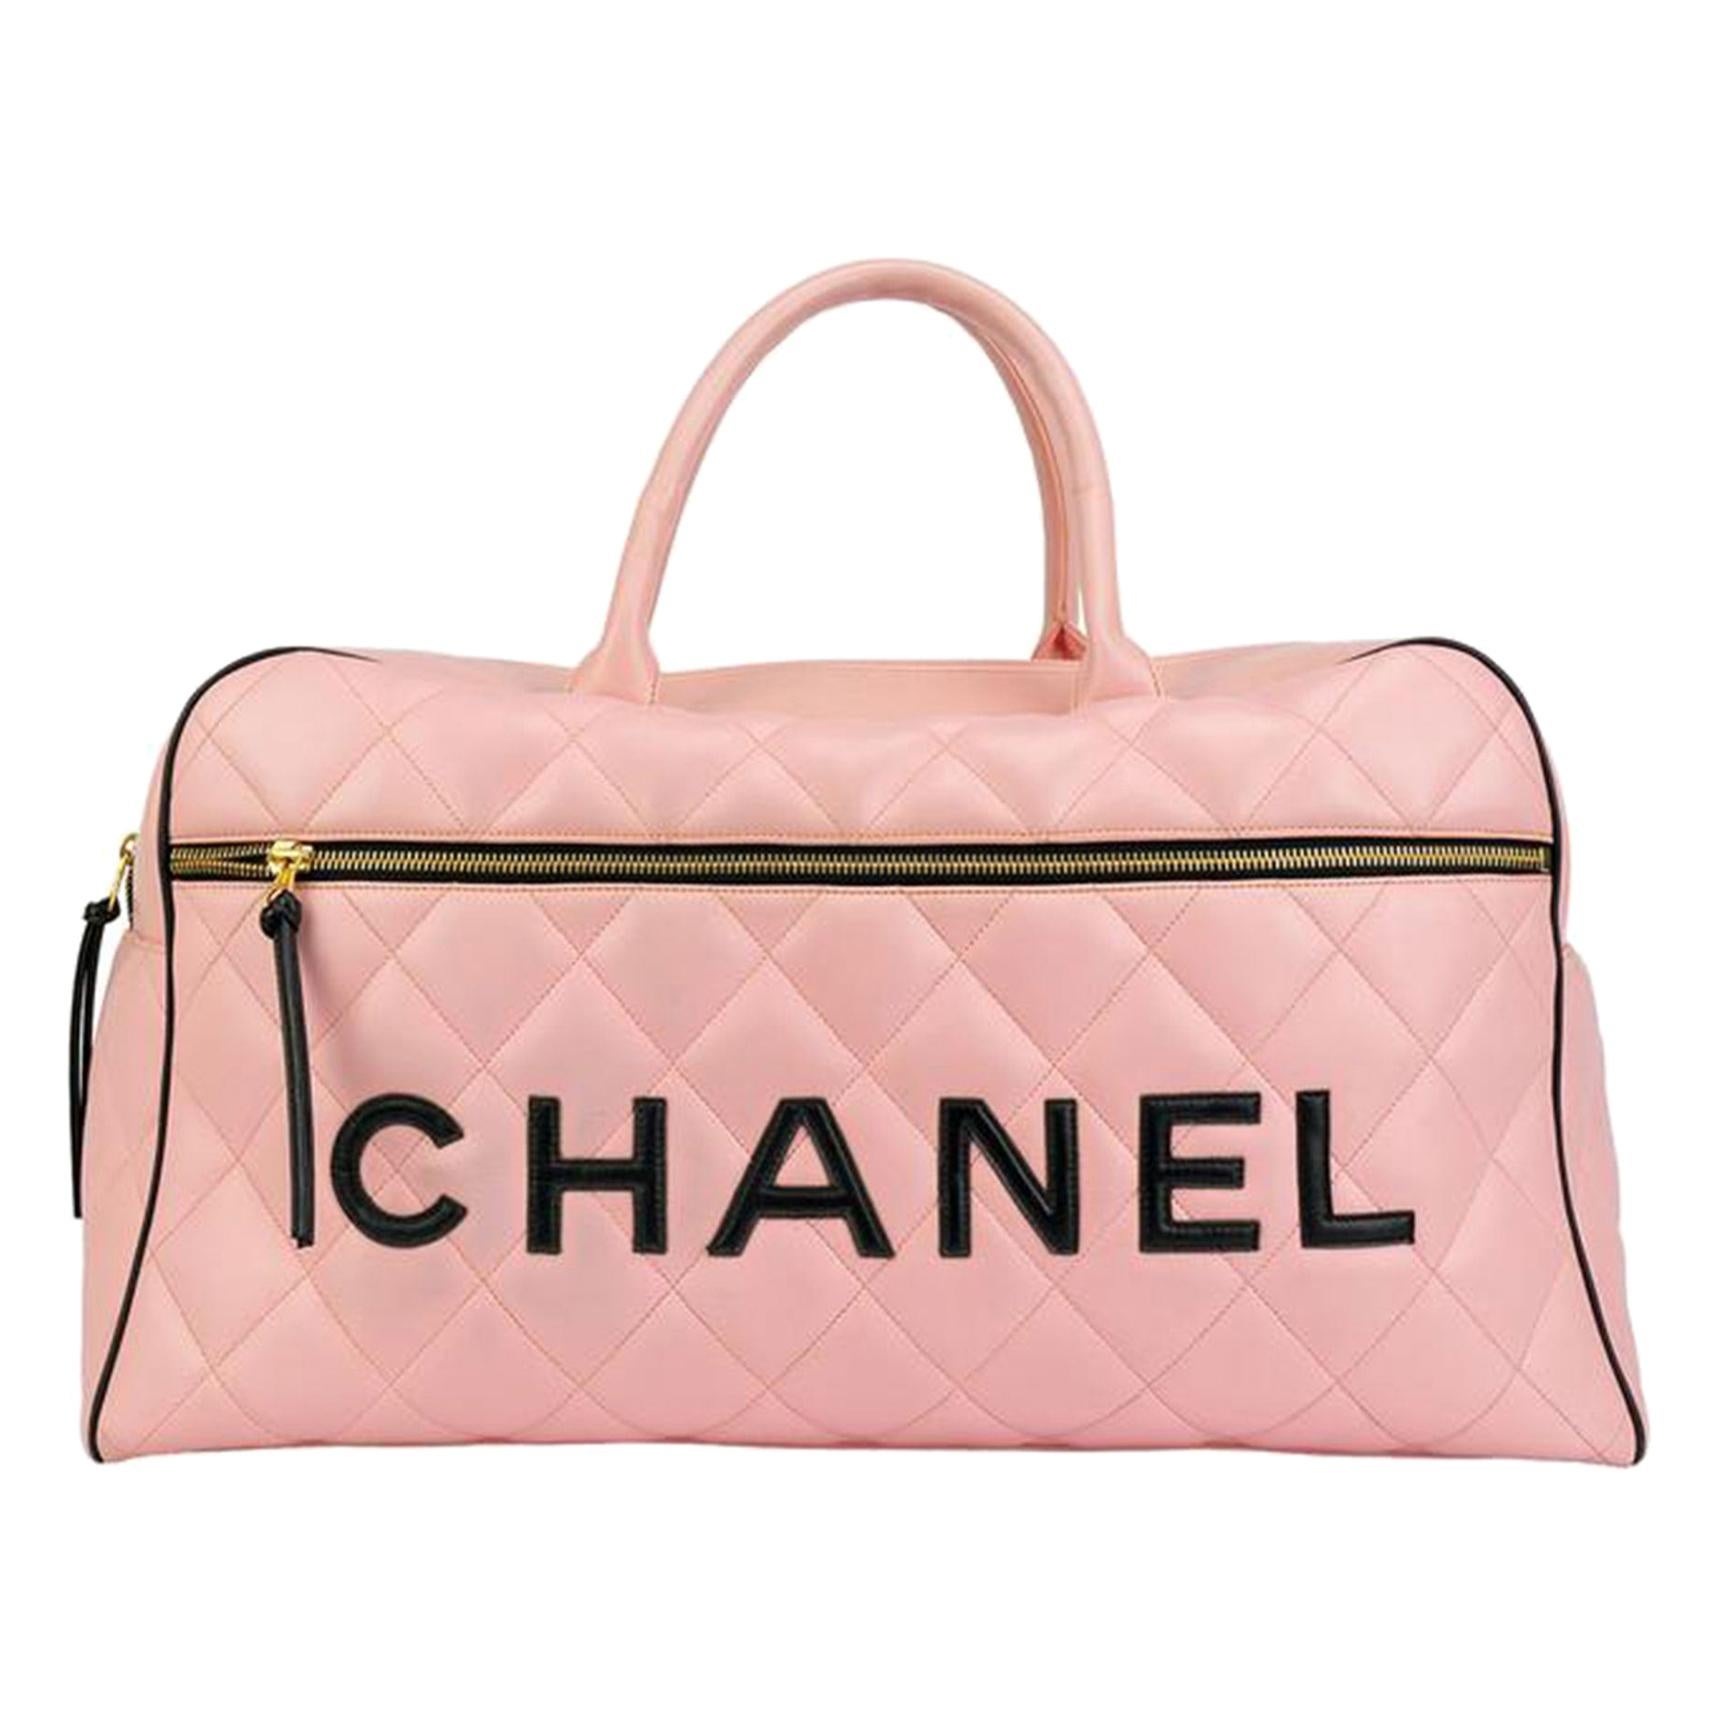 Chanel Rare Pink Vintage 1990 Weekend Duffel Overnight Duffle Tote 